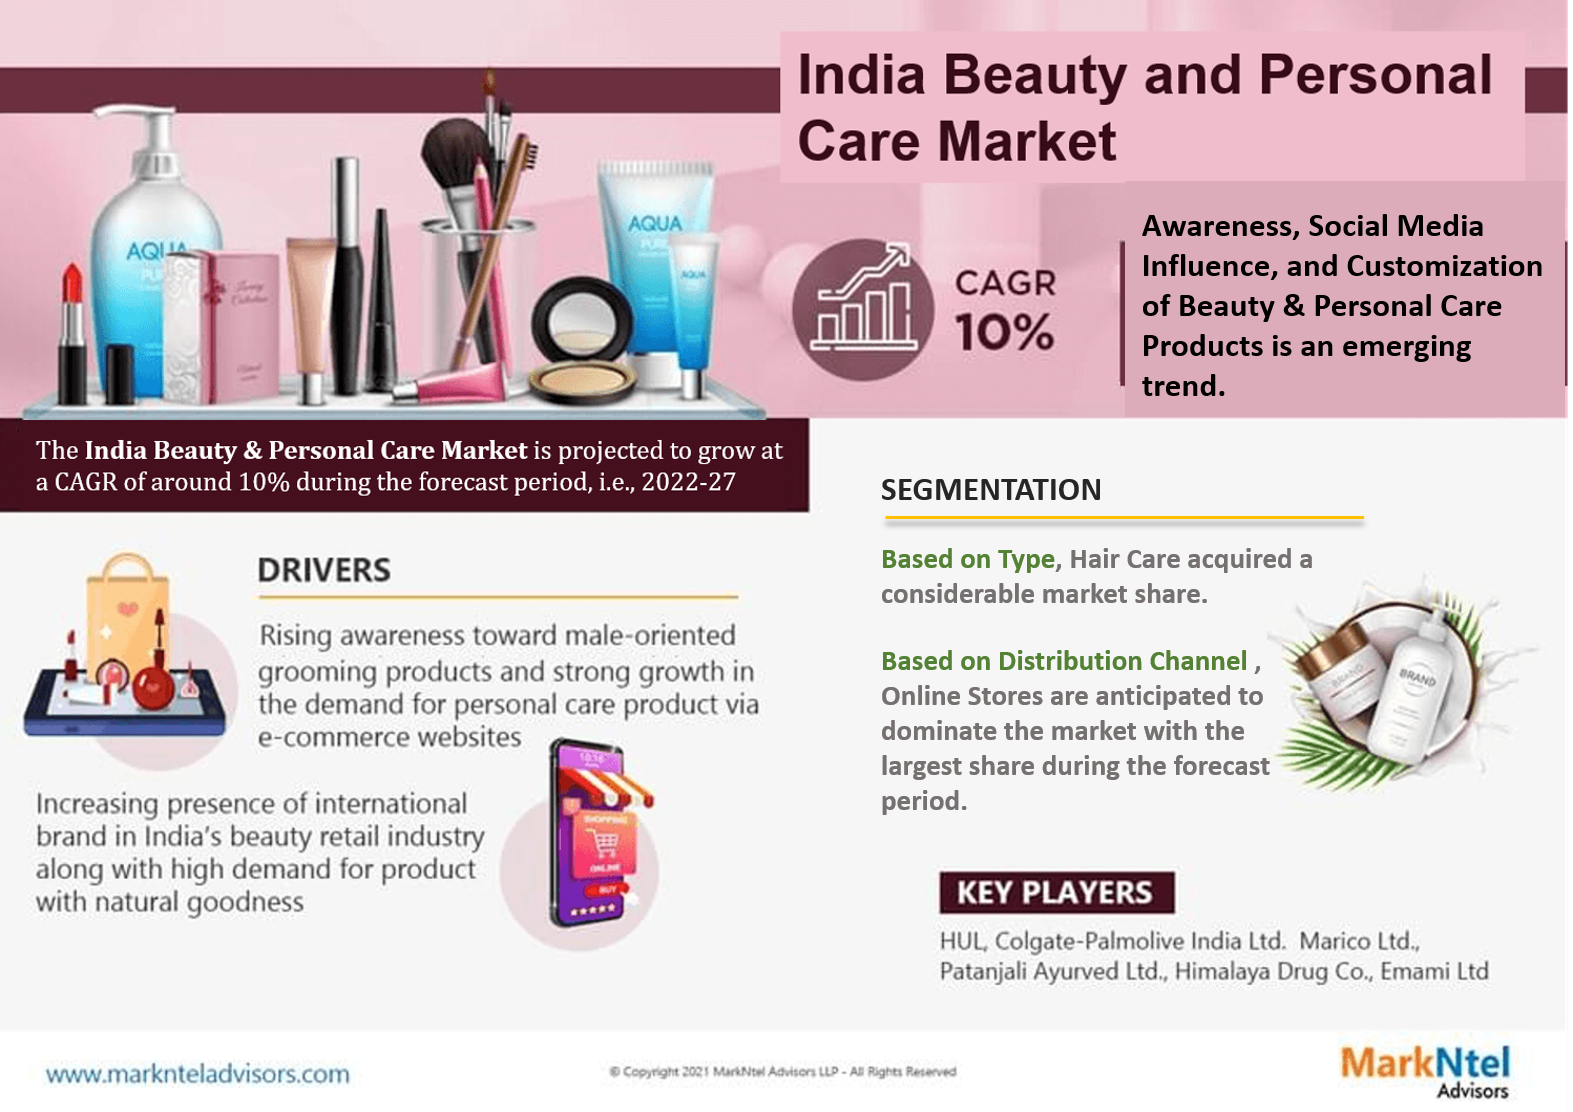 India Beauty and Personal Care Market